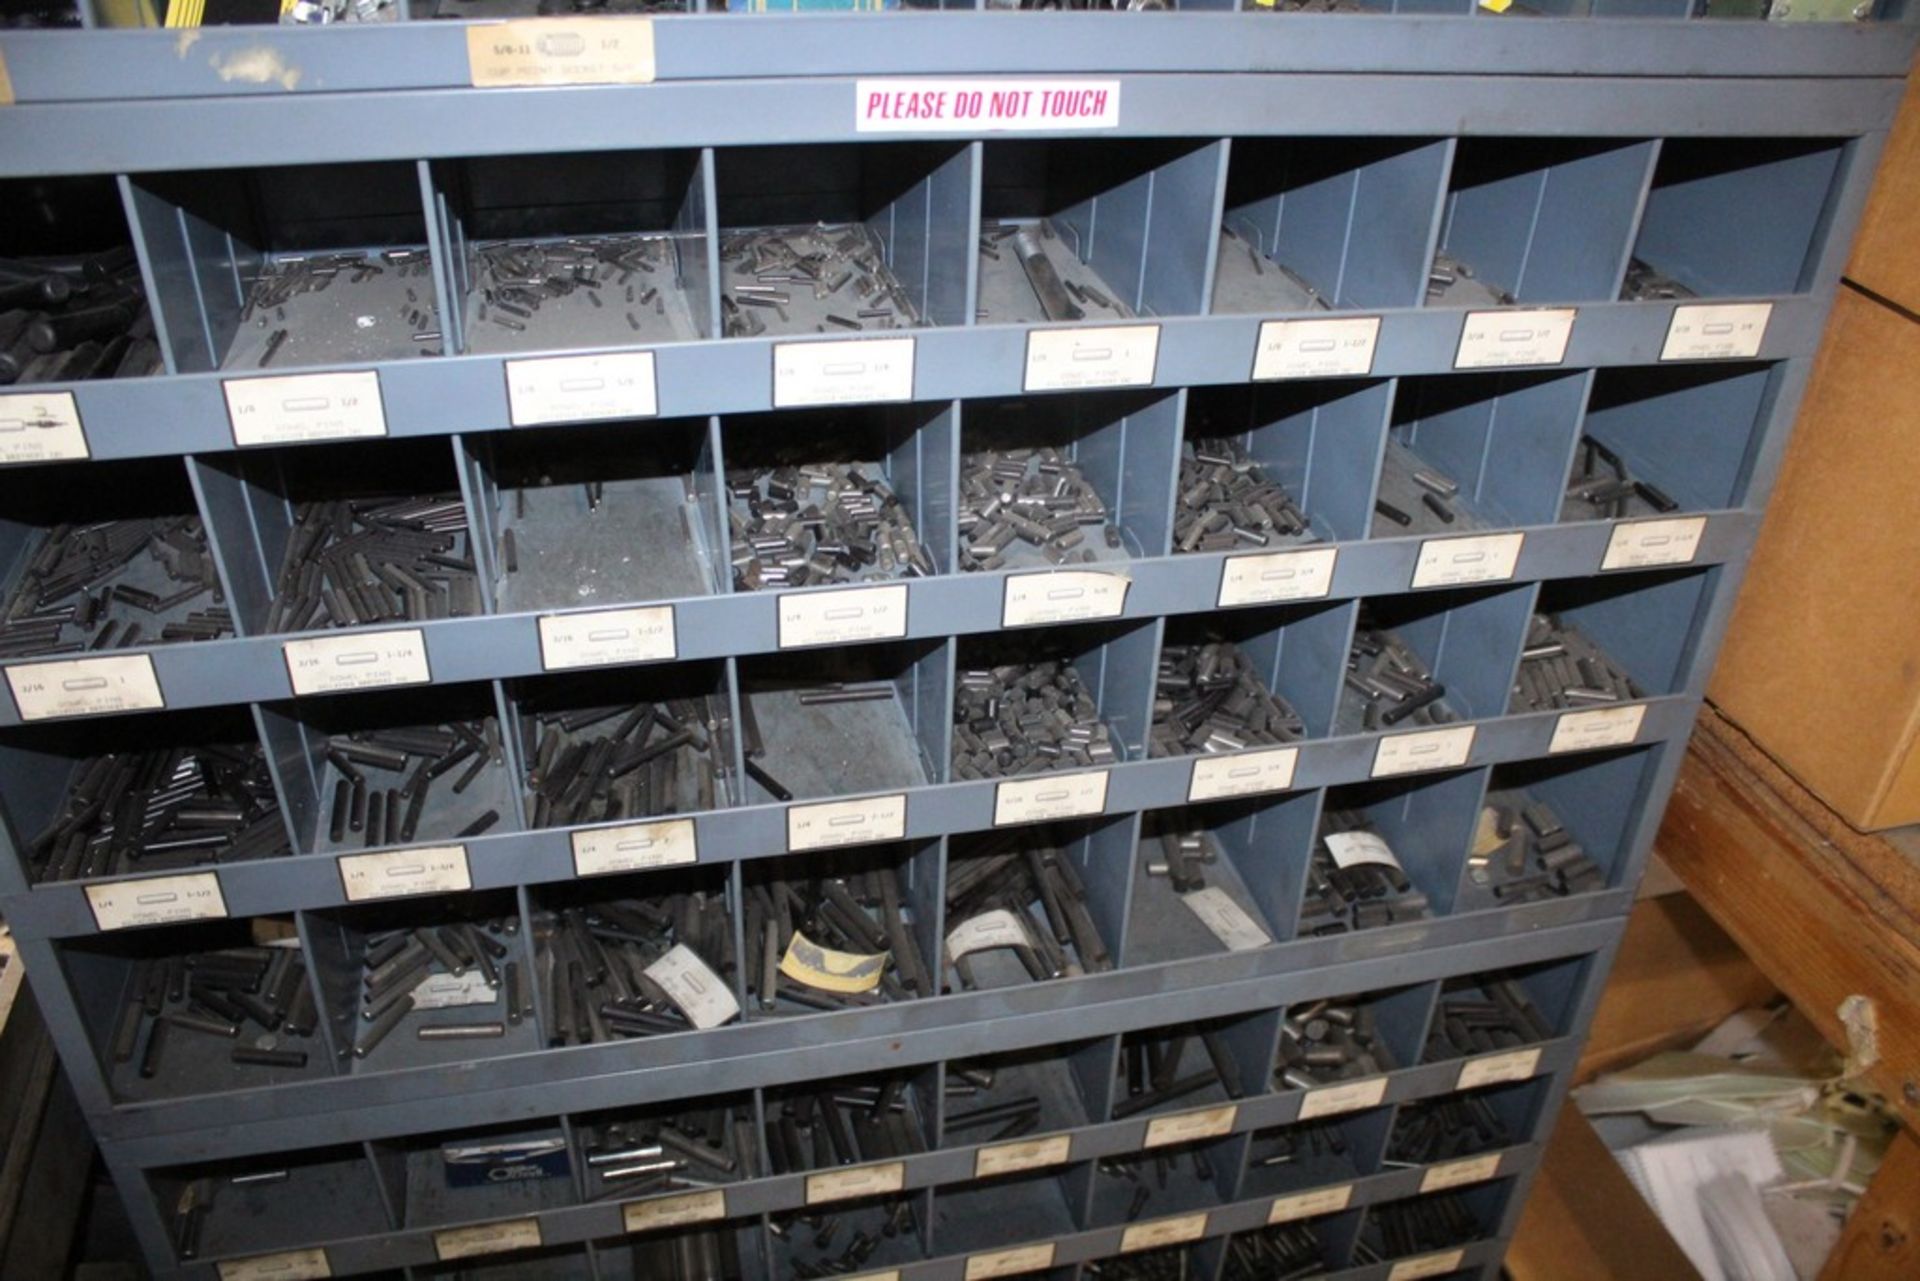 (3) 32 SLOT PIGEON HOLE PARTS CABINETS AND CONTENTS OF SORTED SET SCREWS, DOWEL PINS AND SHOULDER - Image 2 of 3